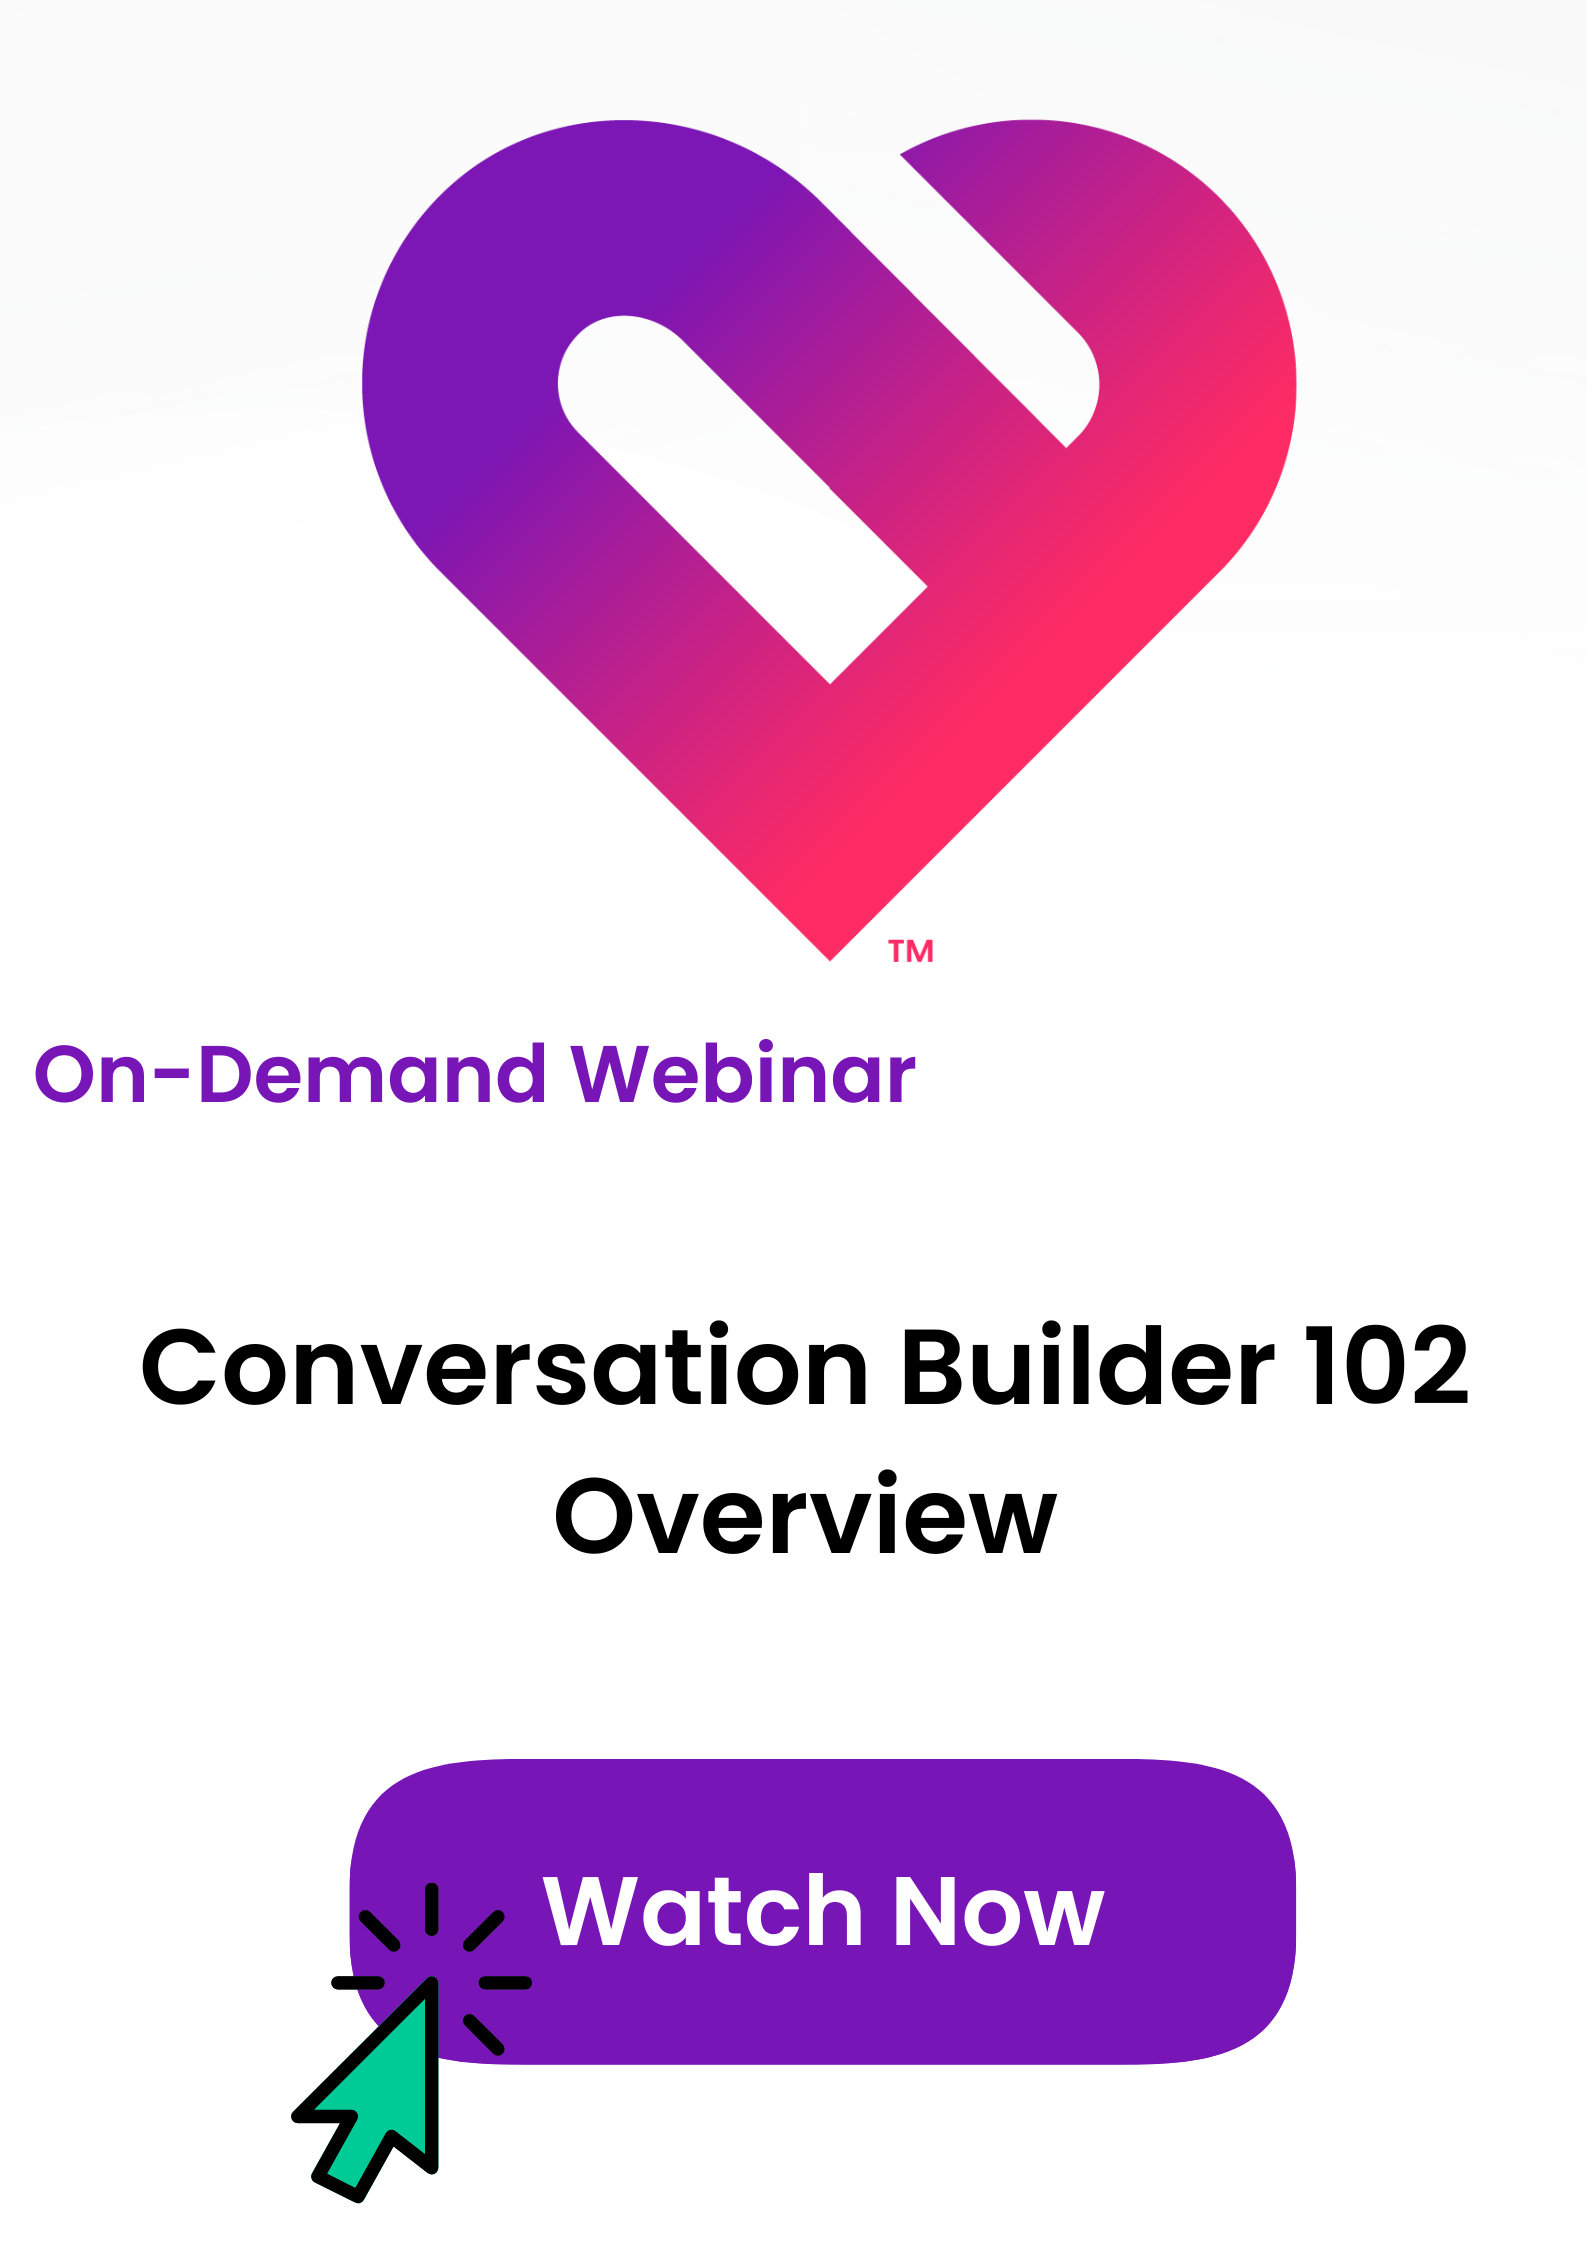 On-demand webinar tile for Conversation Builder 102 Overview, click to watch now